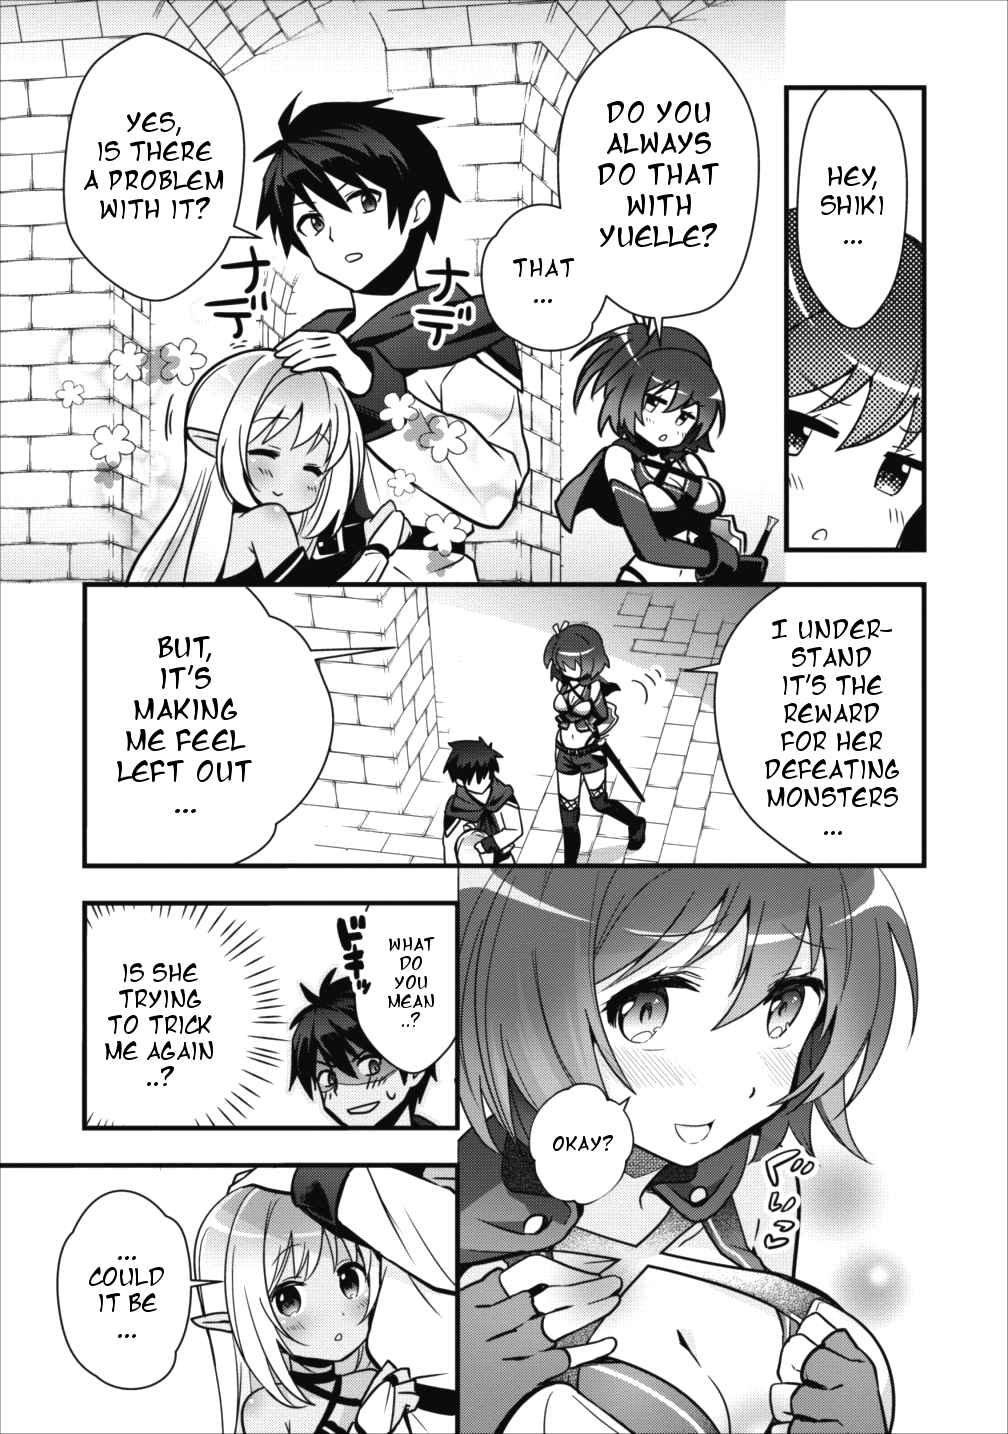 I Work As A Healer In Another World's Labyrinth City Vol. 1 Ch. 3